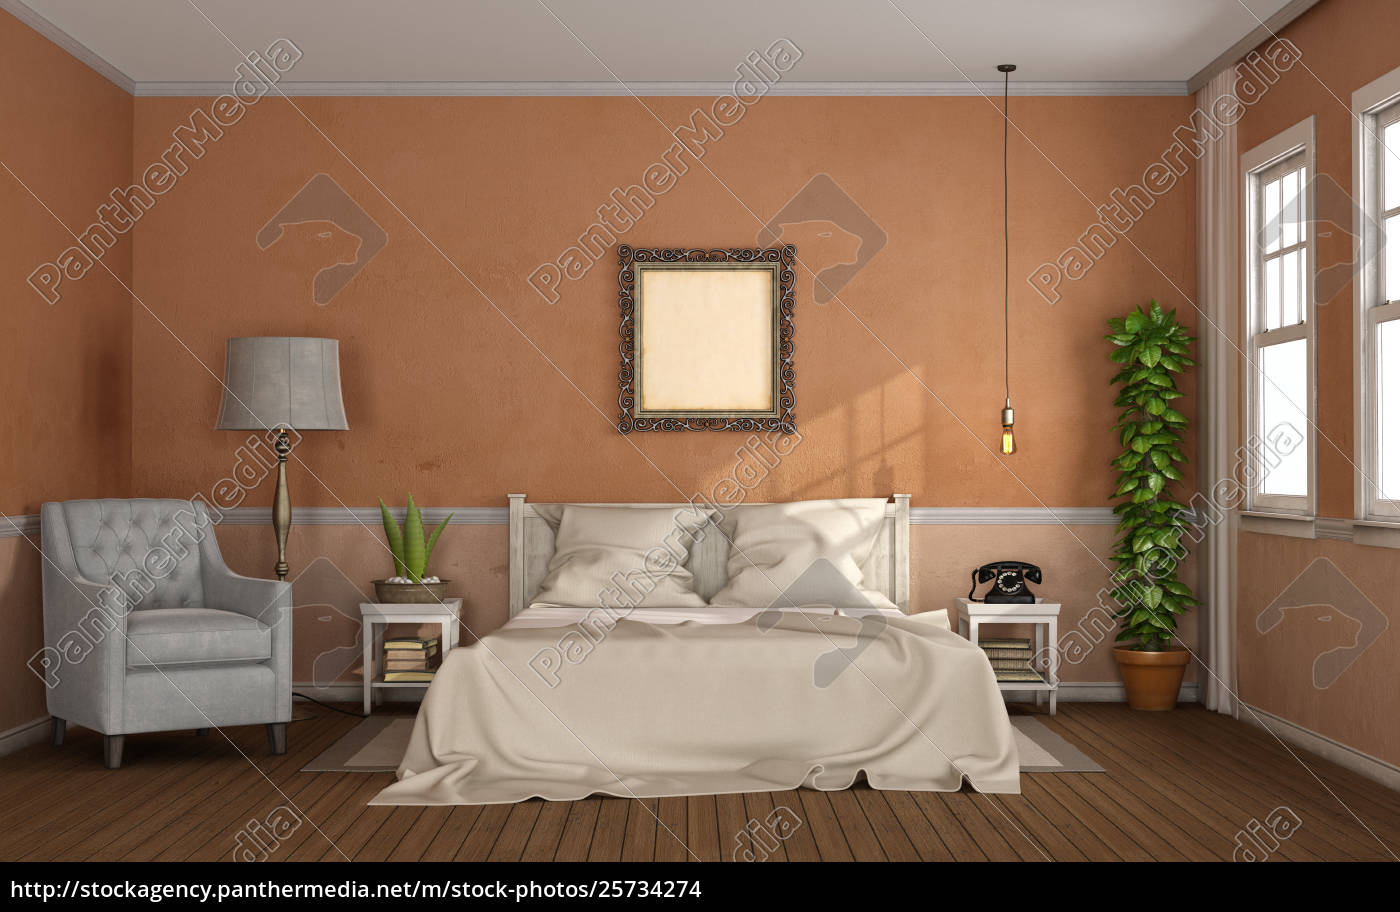 Master Bedroom In Classic Style Stock Image 25734274 Panthermedia Stock Agency